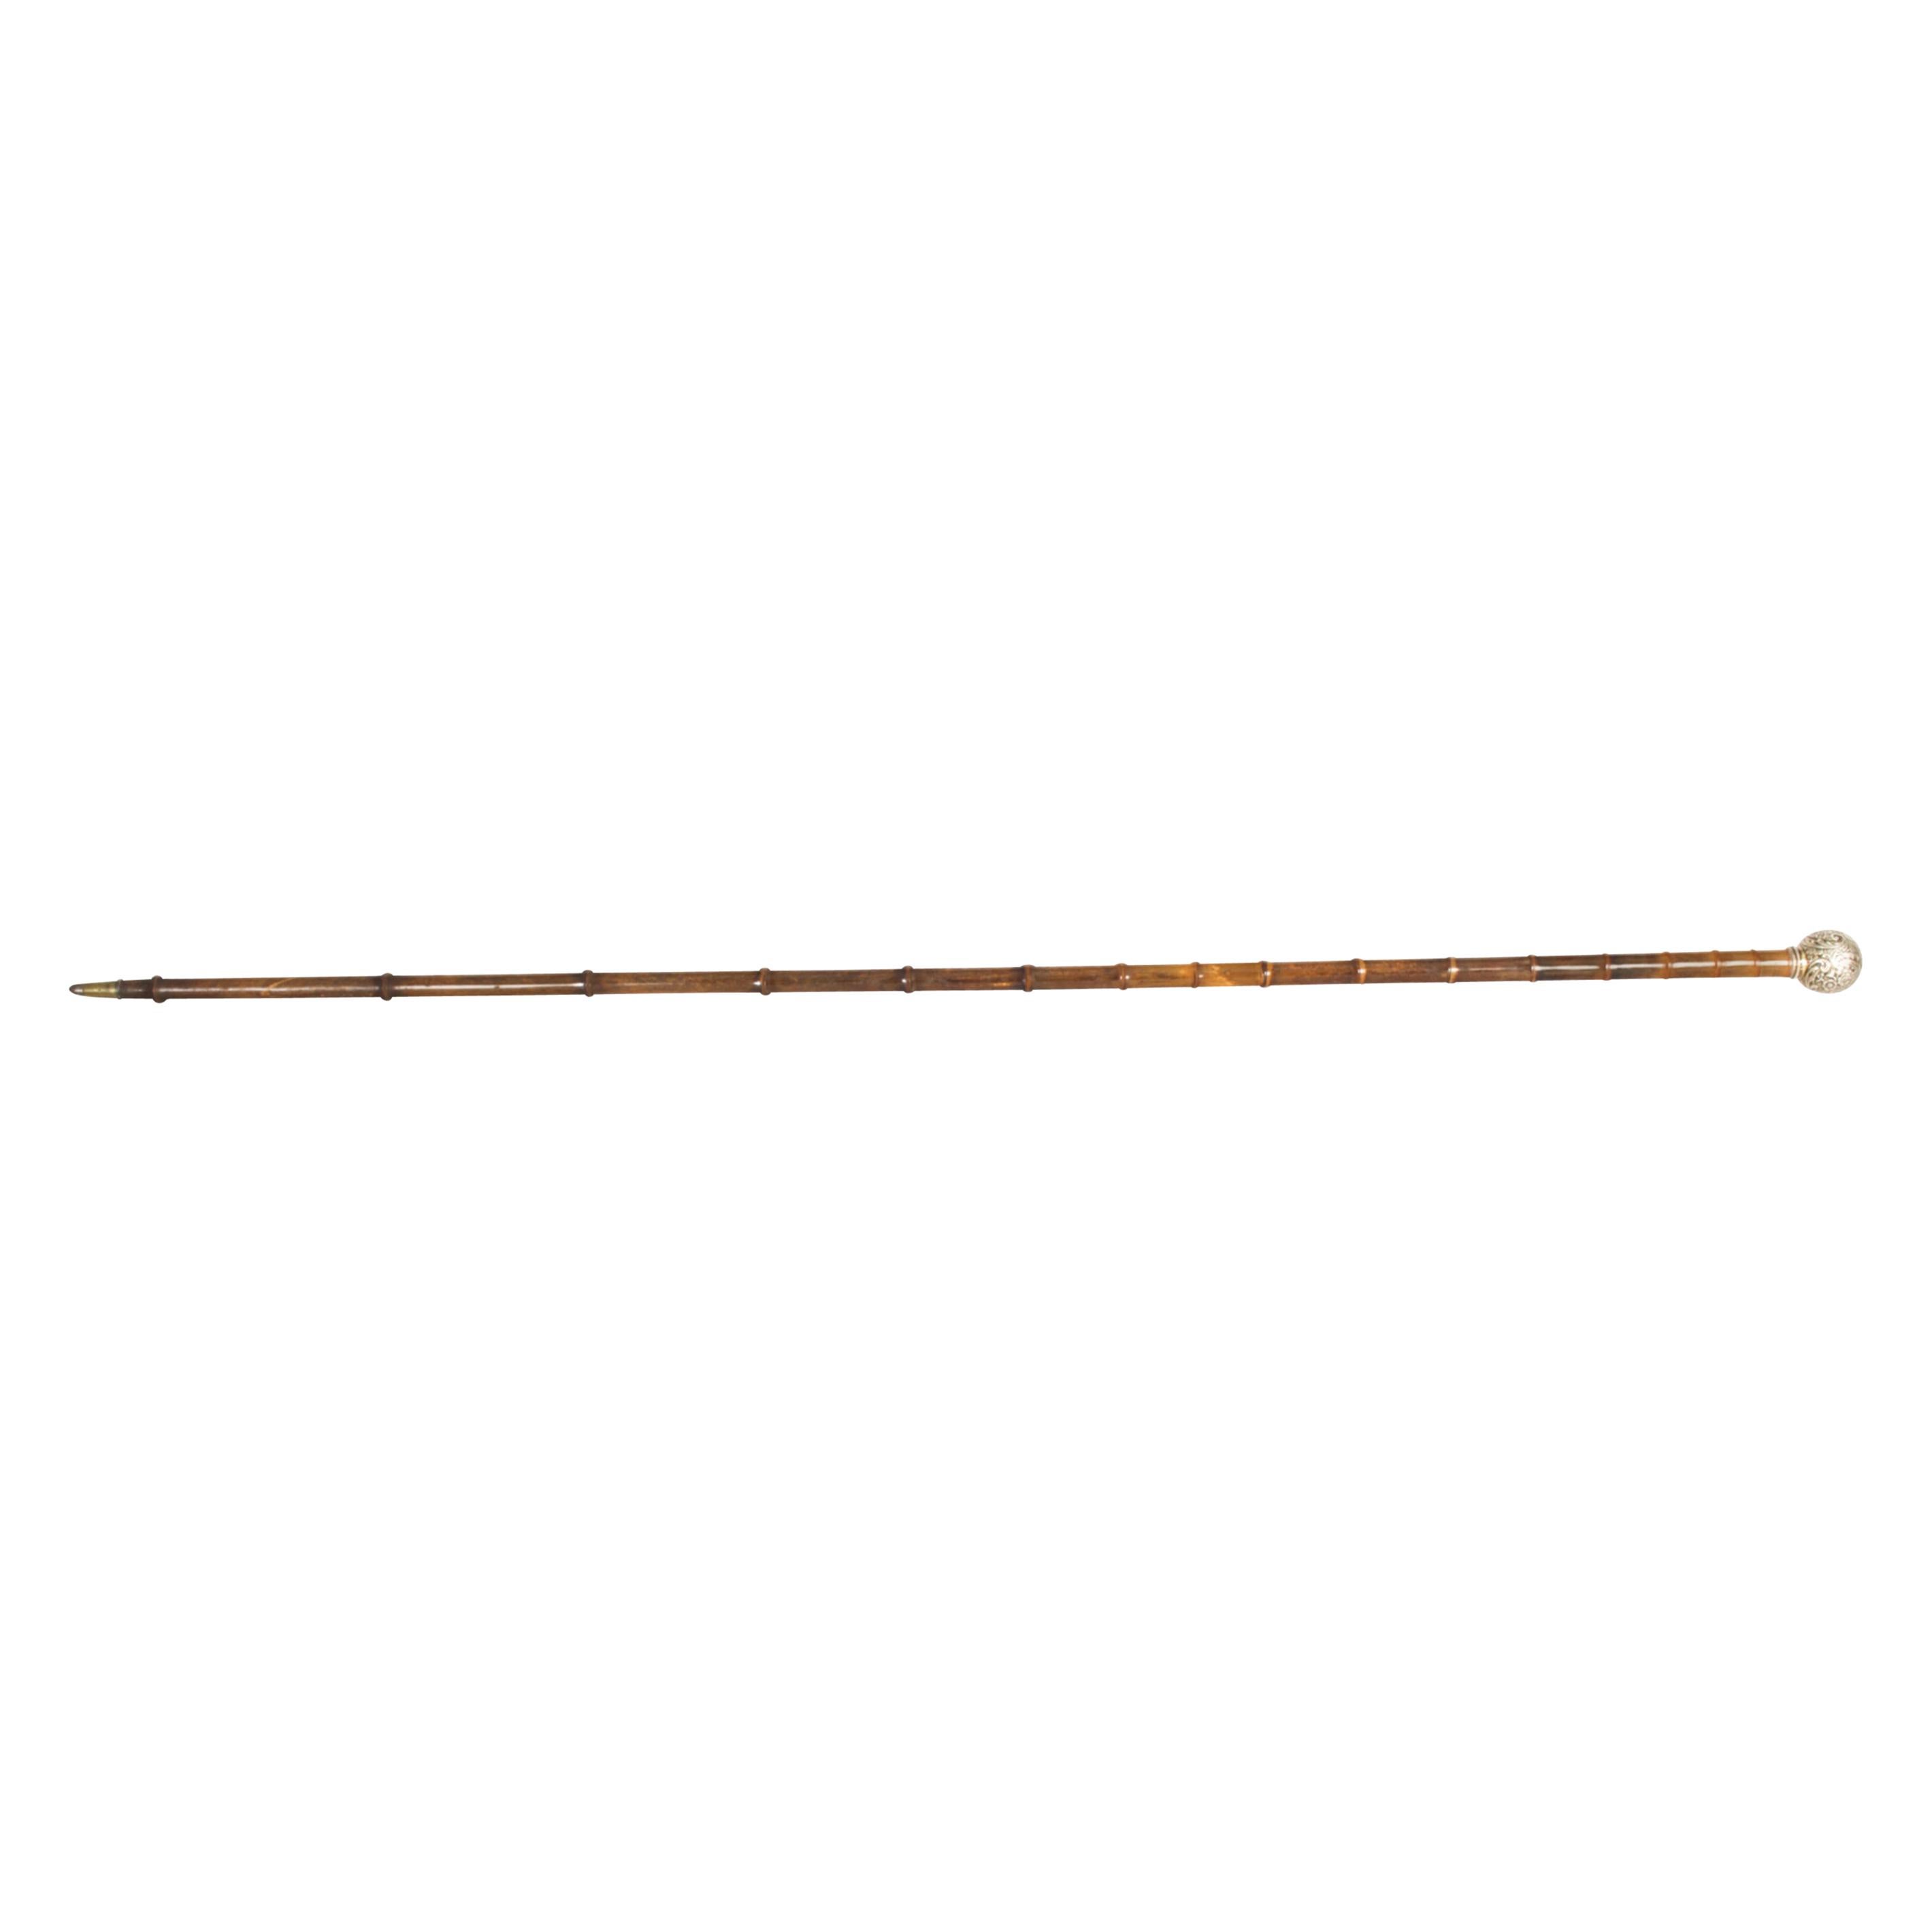 Antique French Silver Plated Long Walking Cane Stick, 19th Century